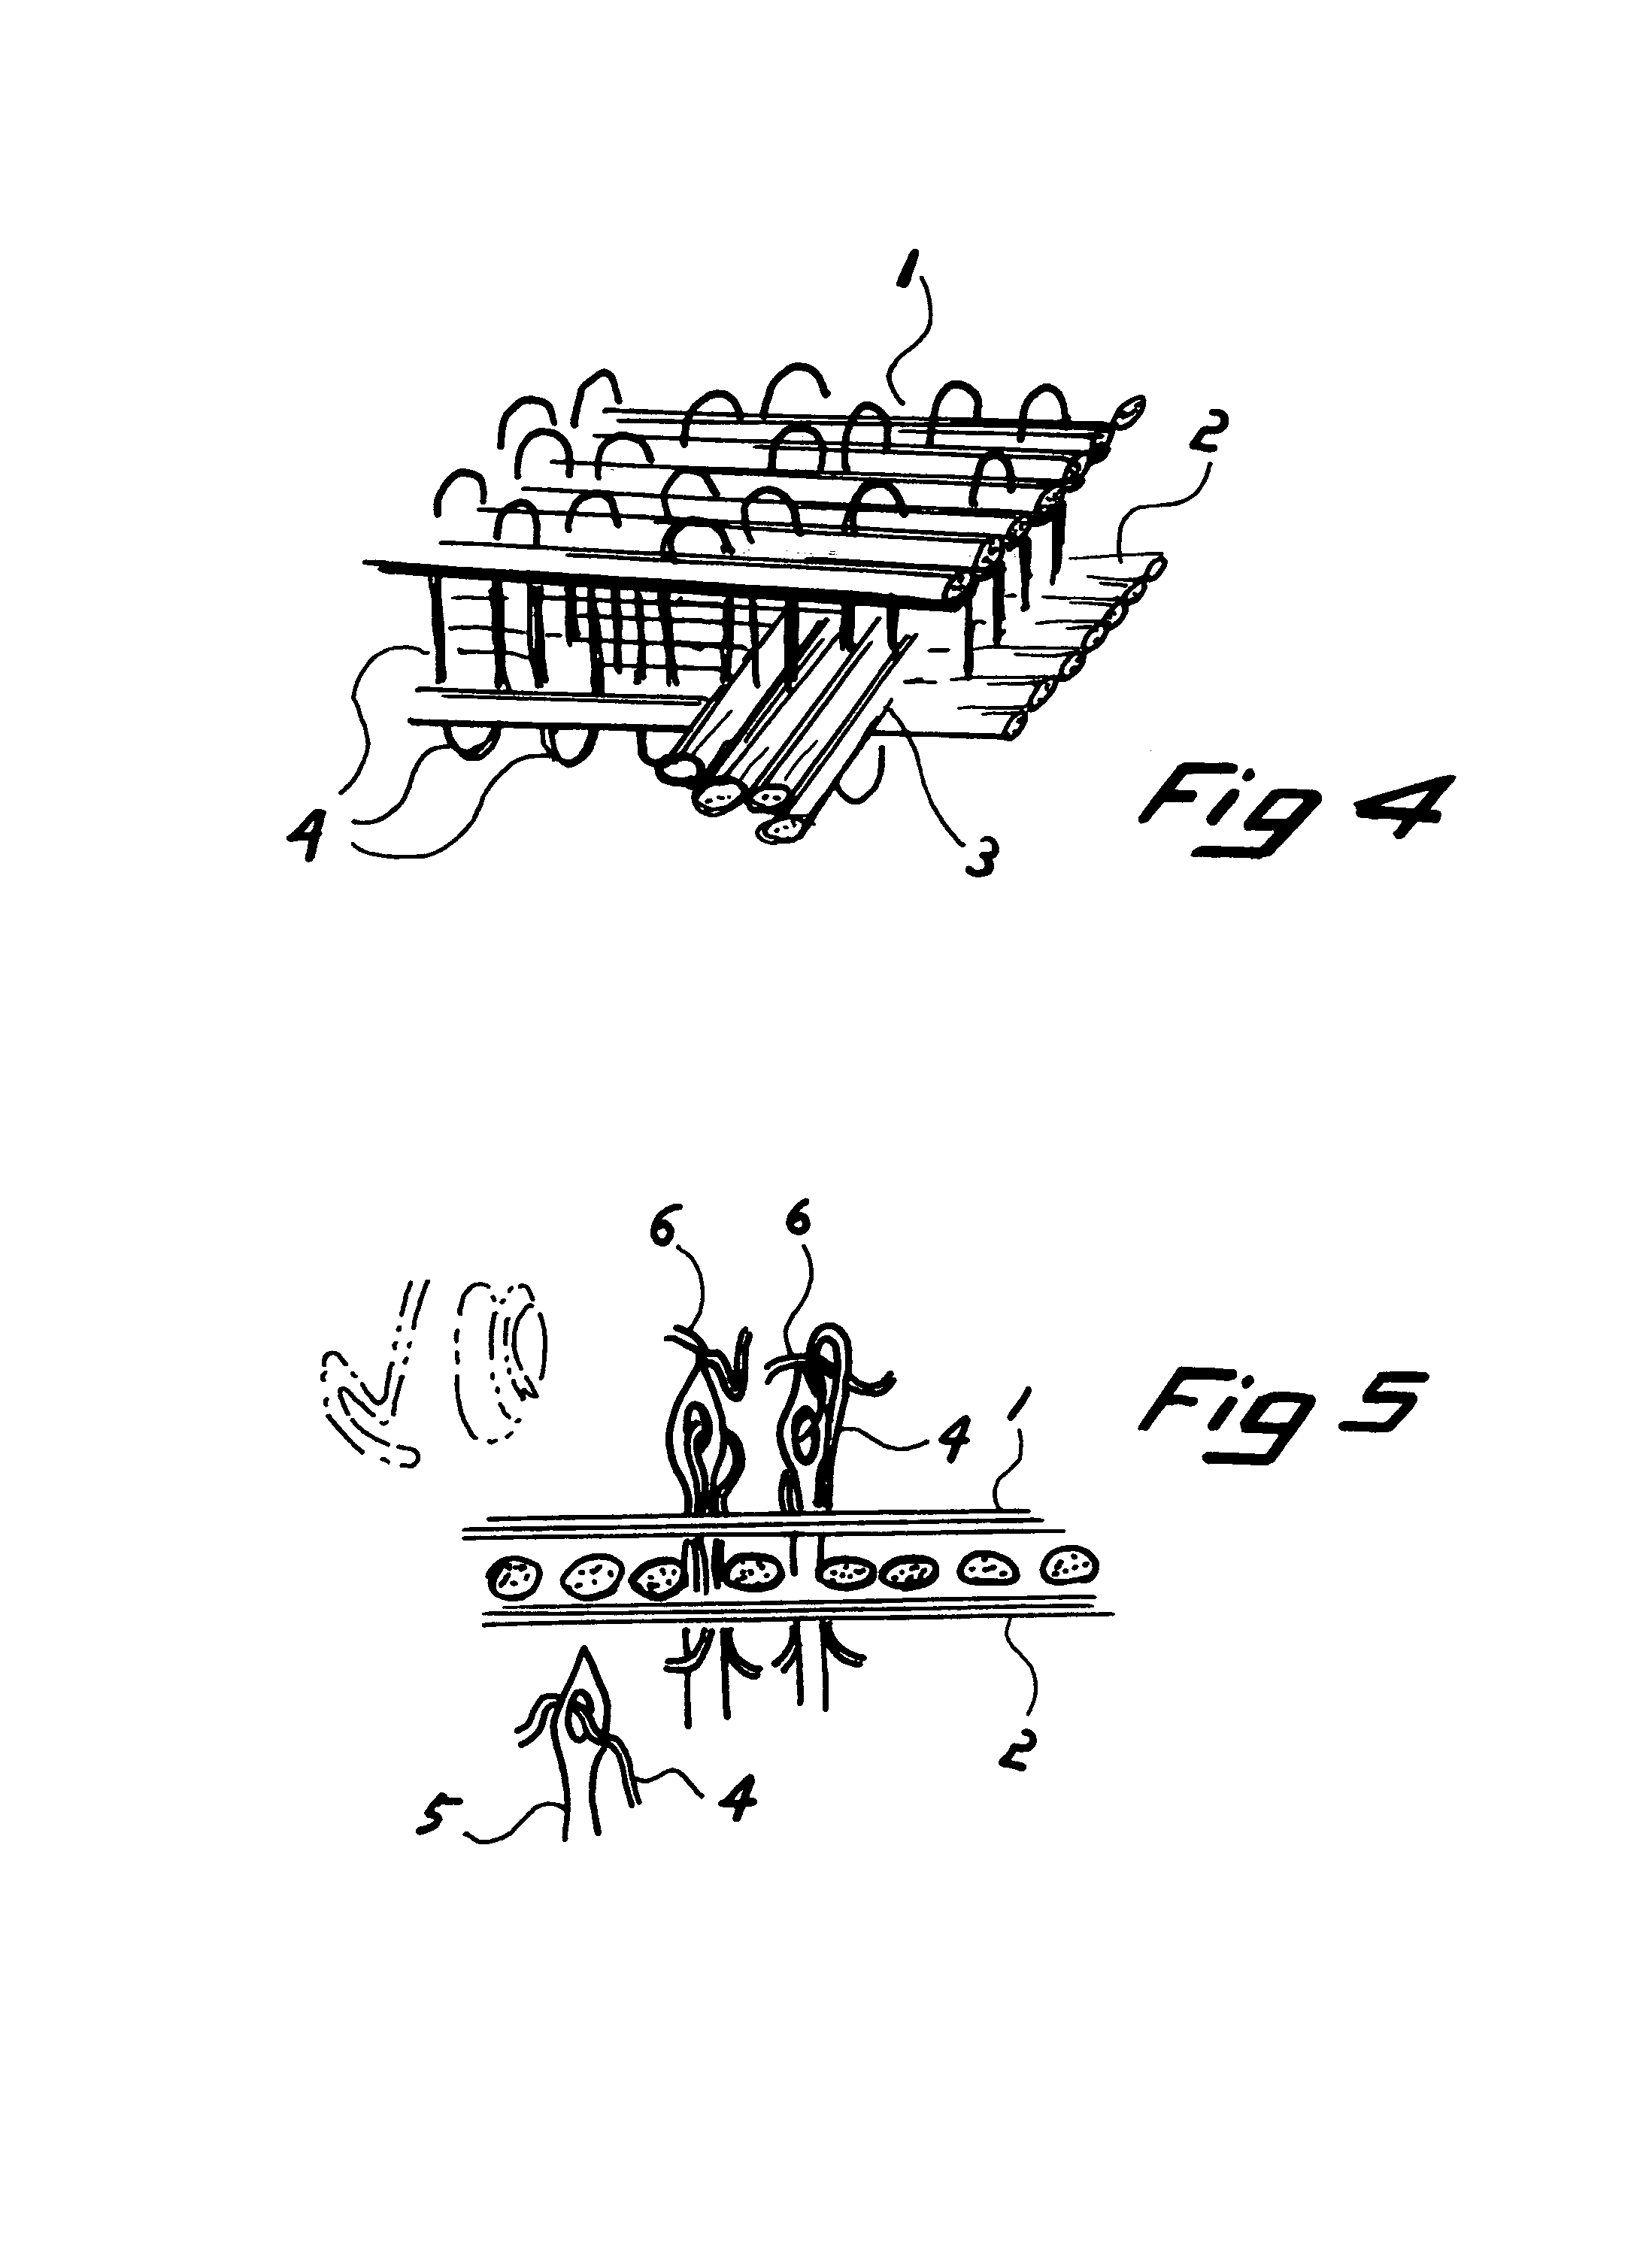 Inter/pre-cured layer/pre-cured embroidered composite laminate and method of producing same